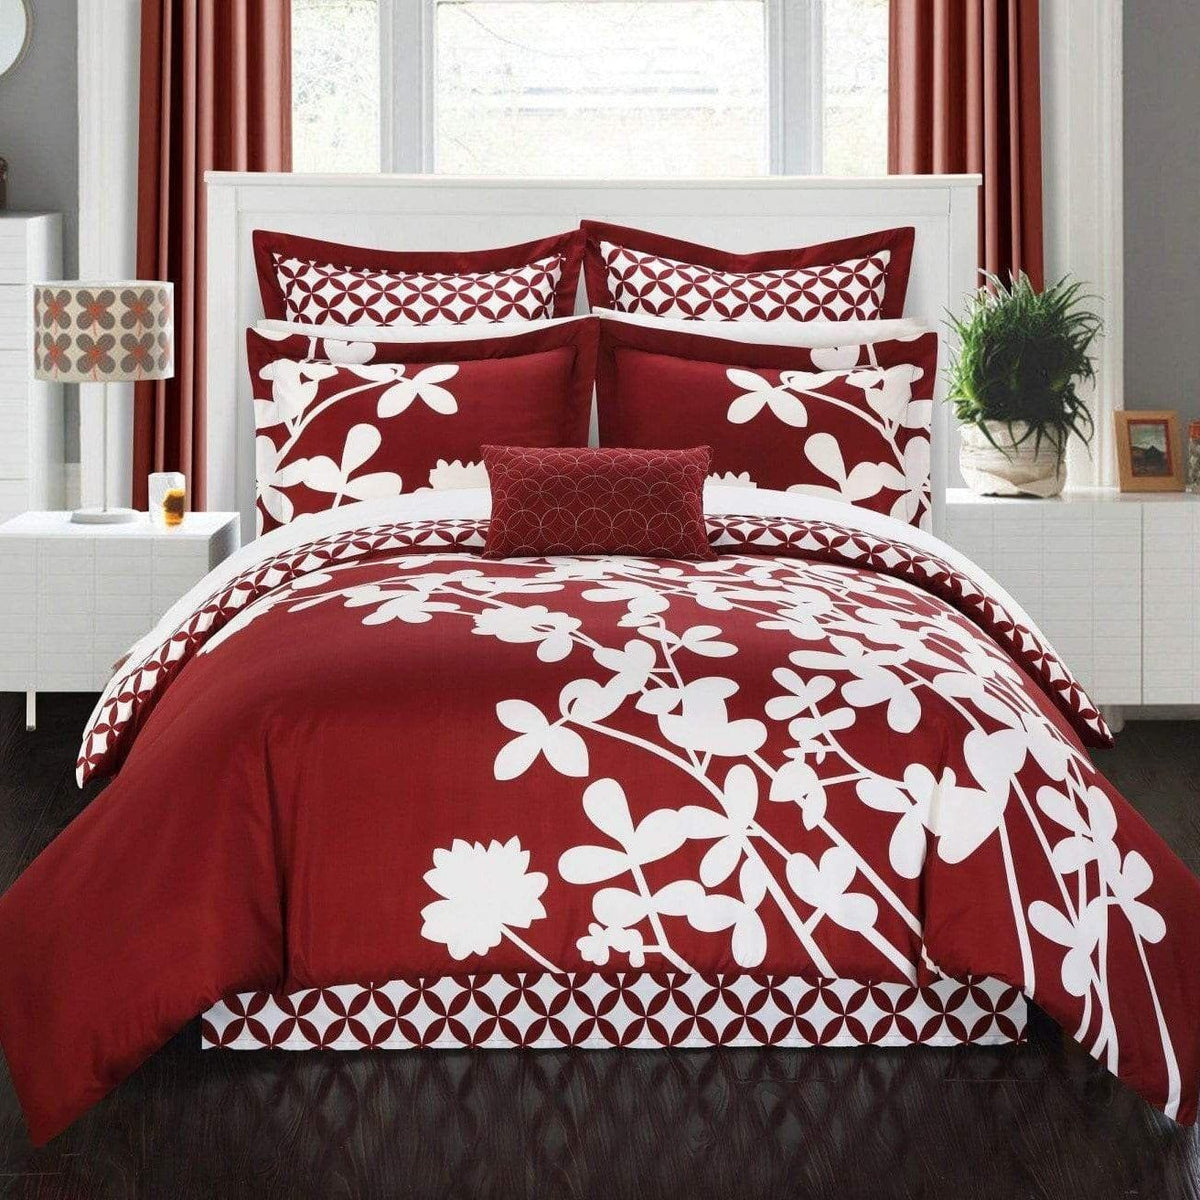 Chic Home Iris 7 Piece Floral Comforter Set Red